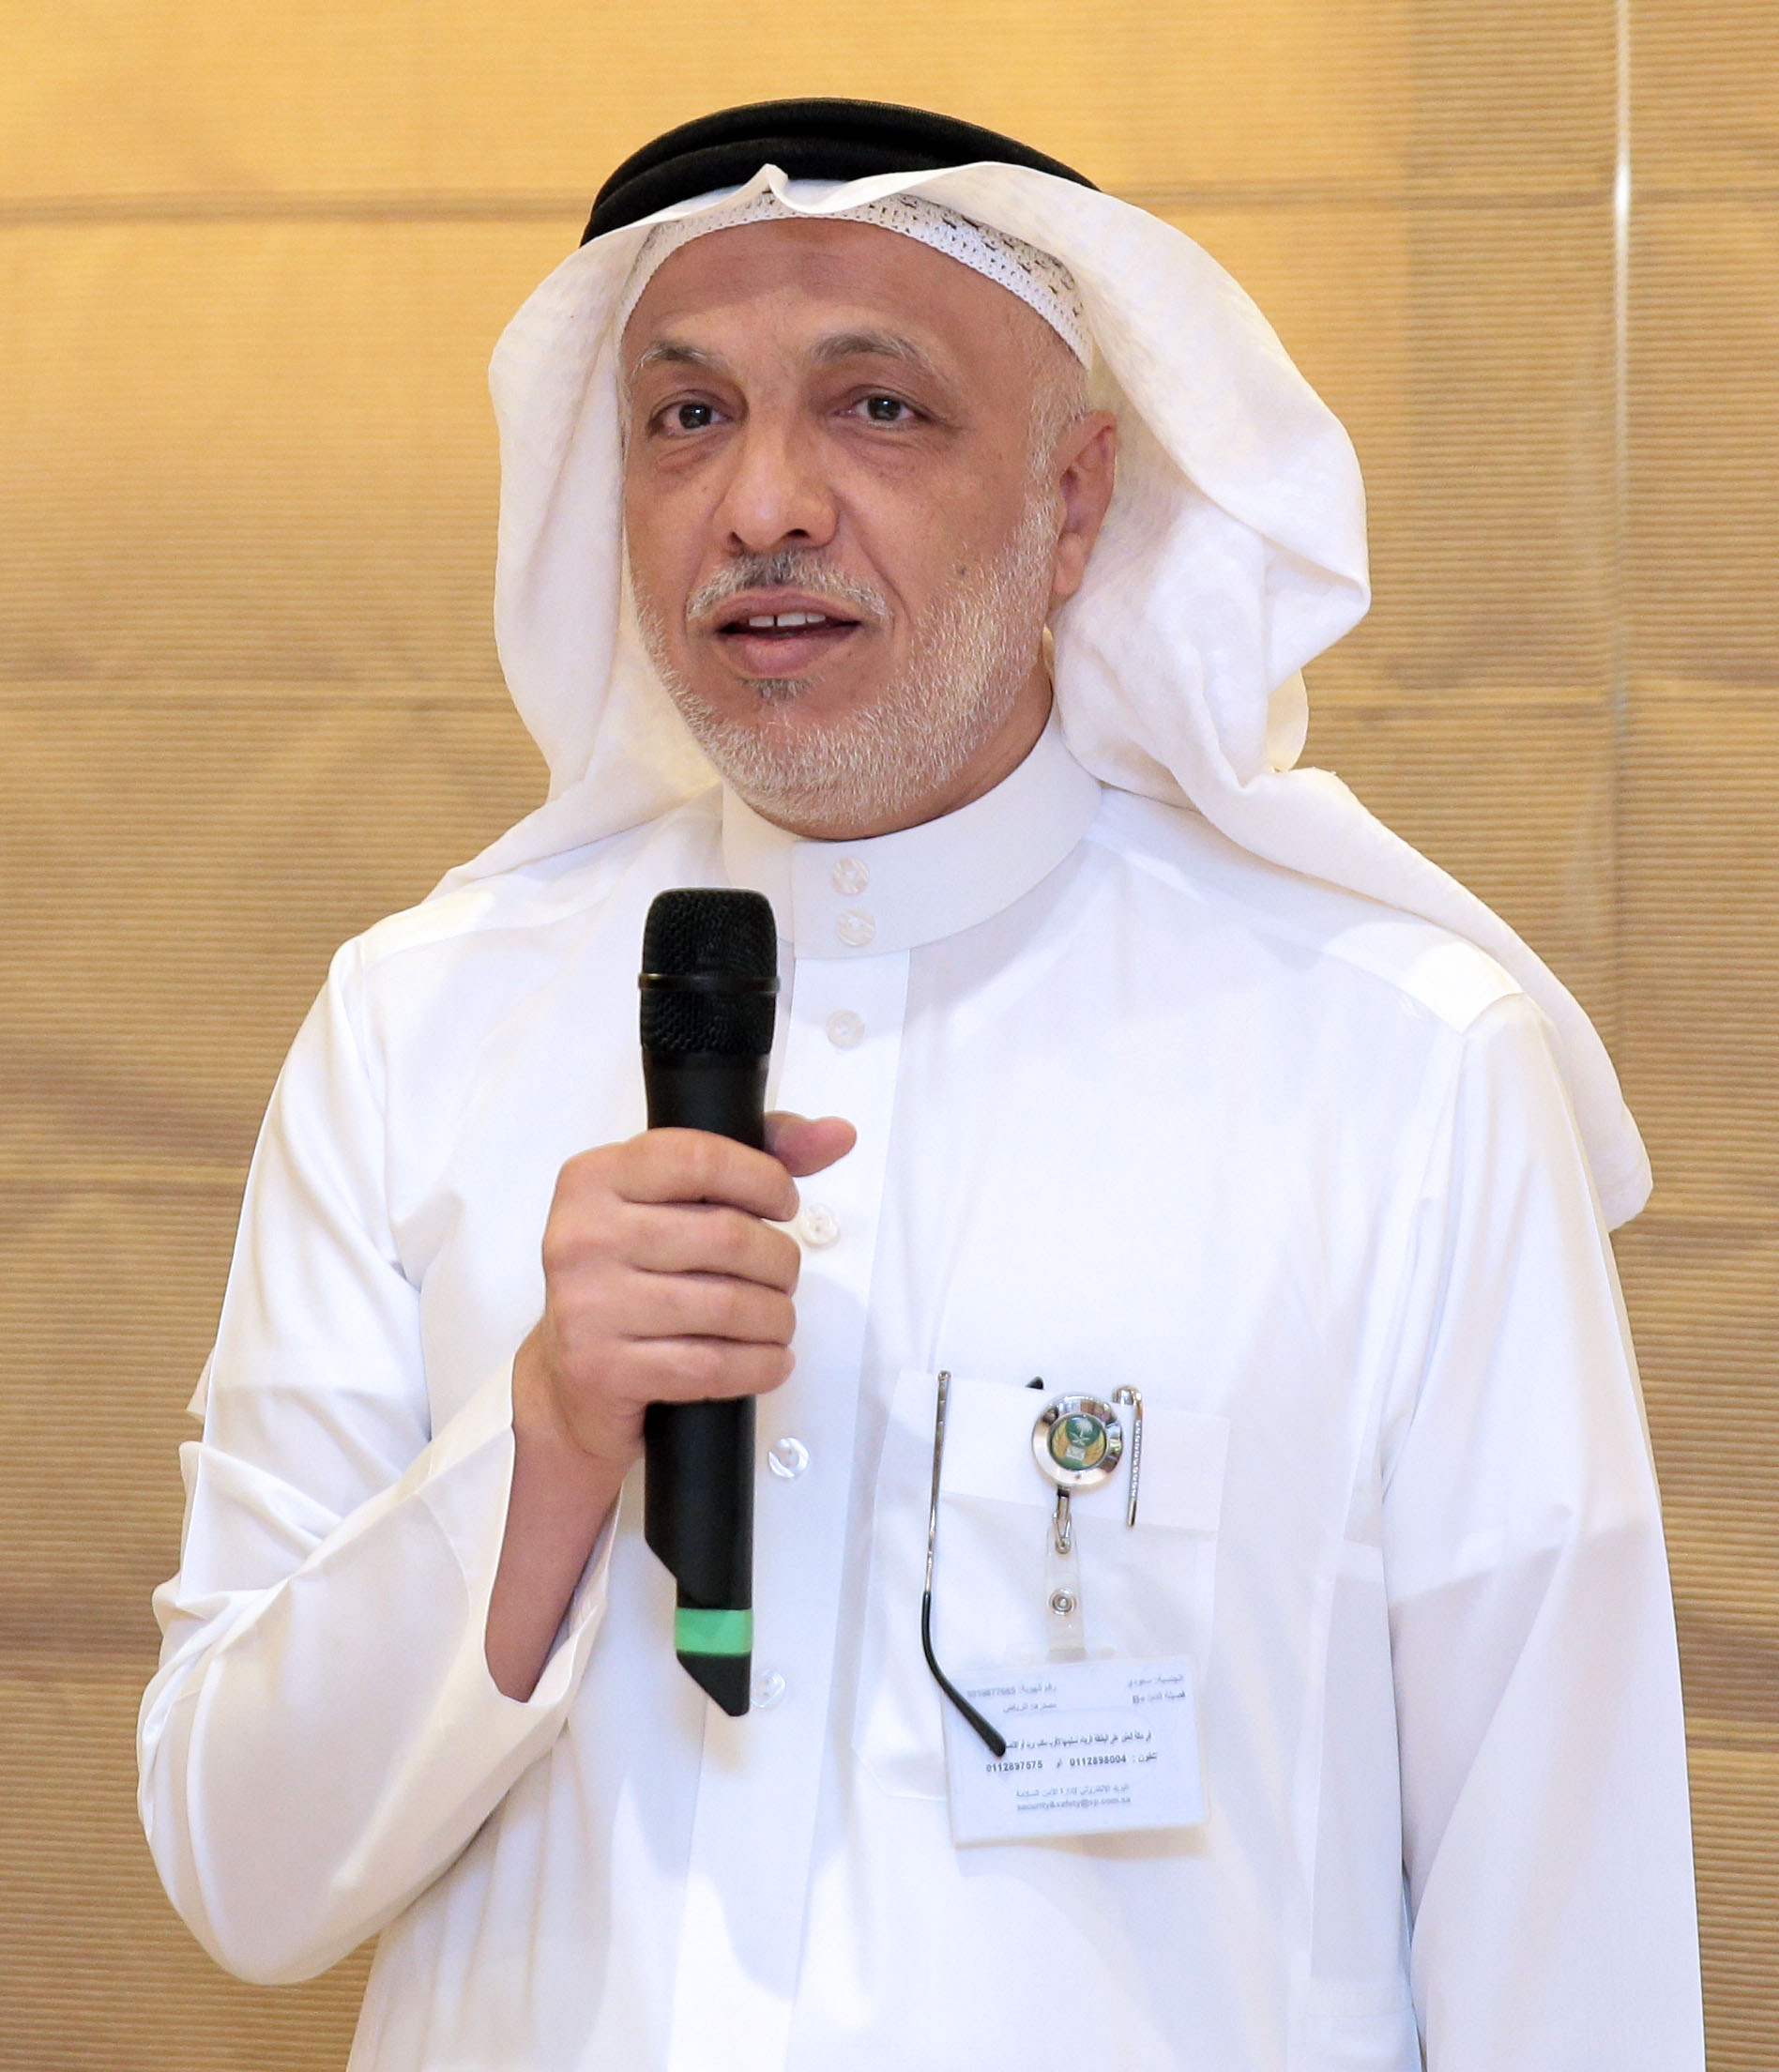 Al-Abduljbar: I look forward to achieving the aspirations of wise leadership and develop The Post future